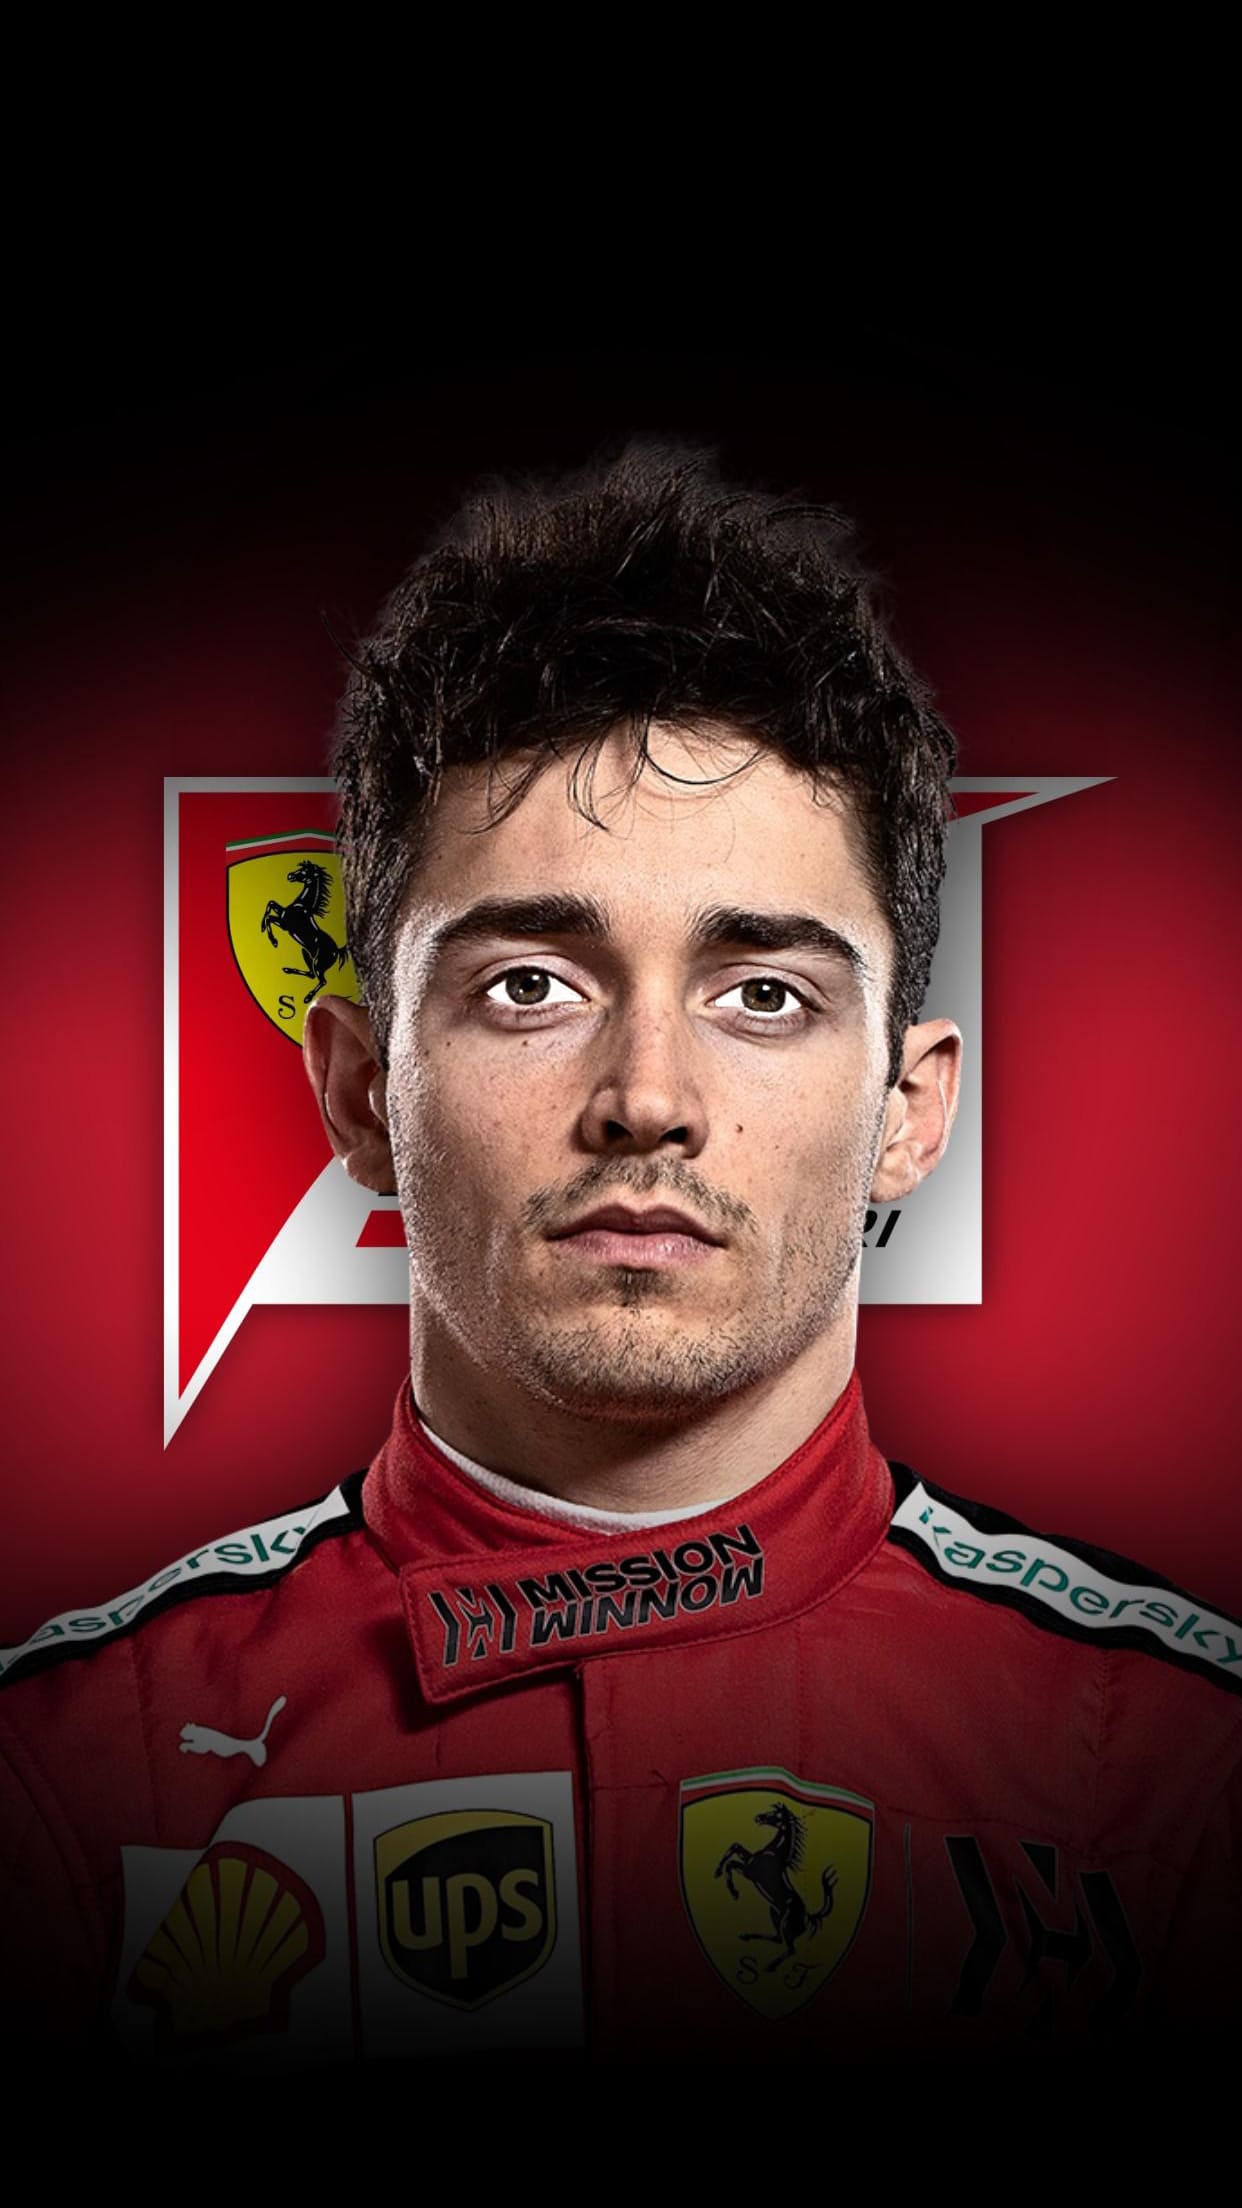 Charles Leclerc Wallpapers